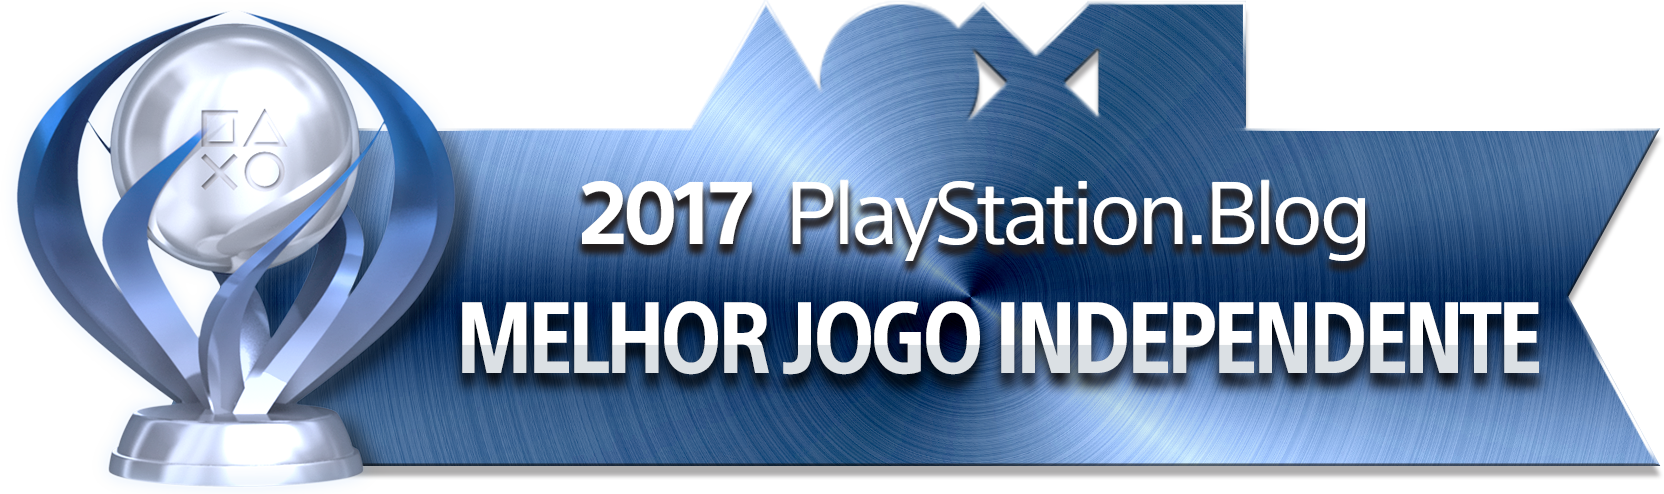 PlayStation Blog Game of the Year 2017 - Best Independent Game (Platinum)